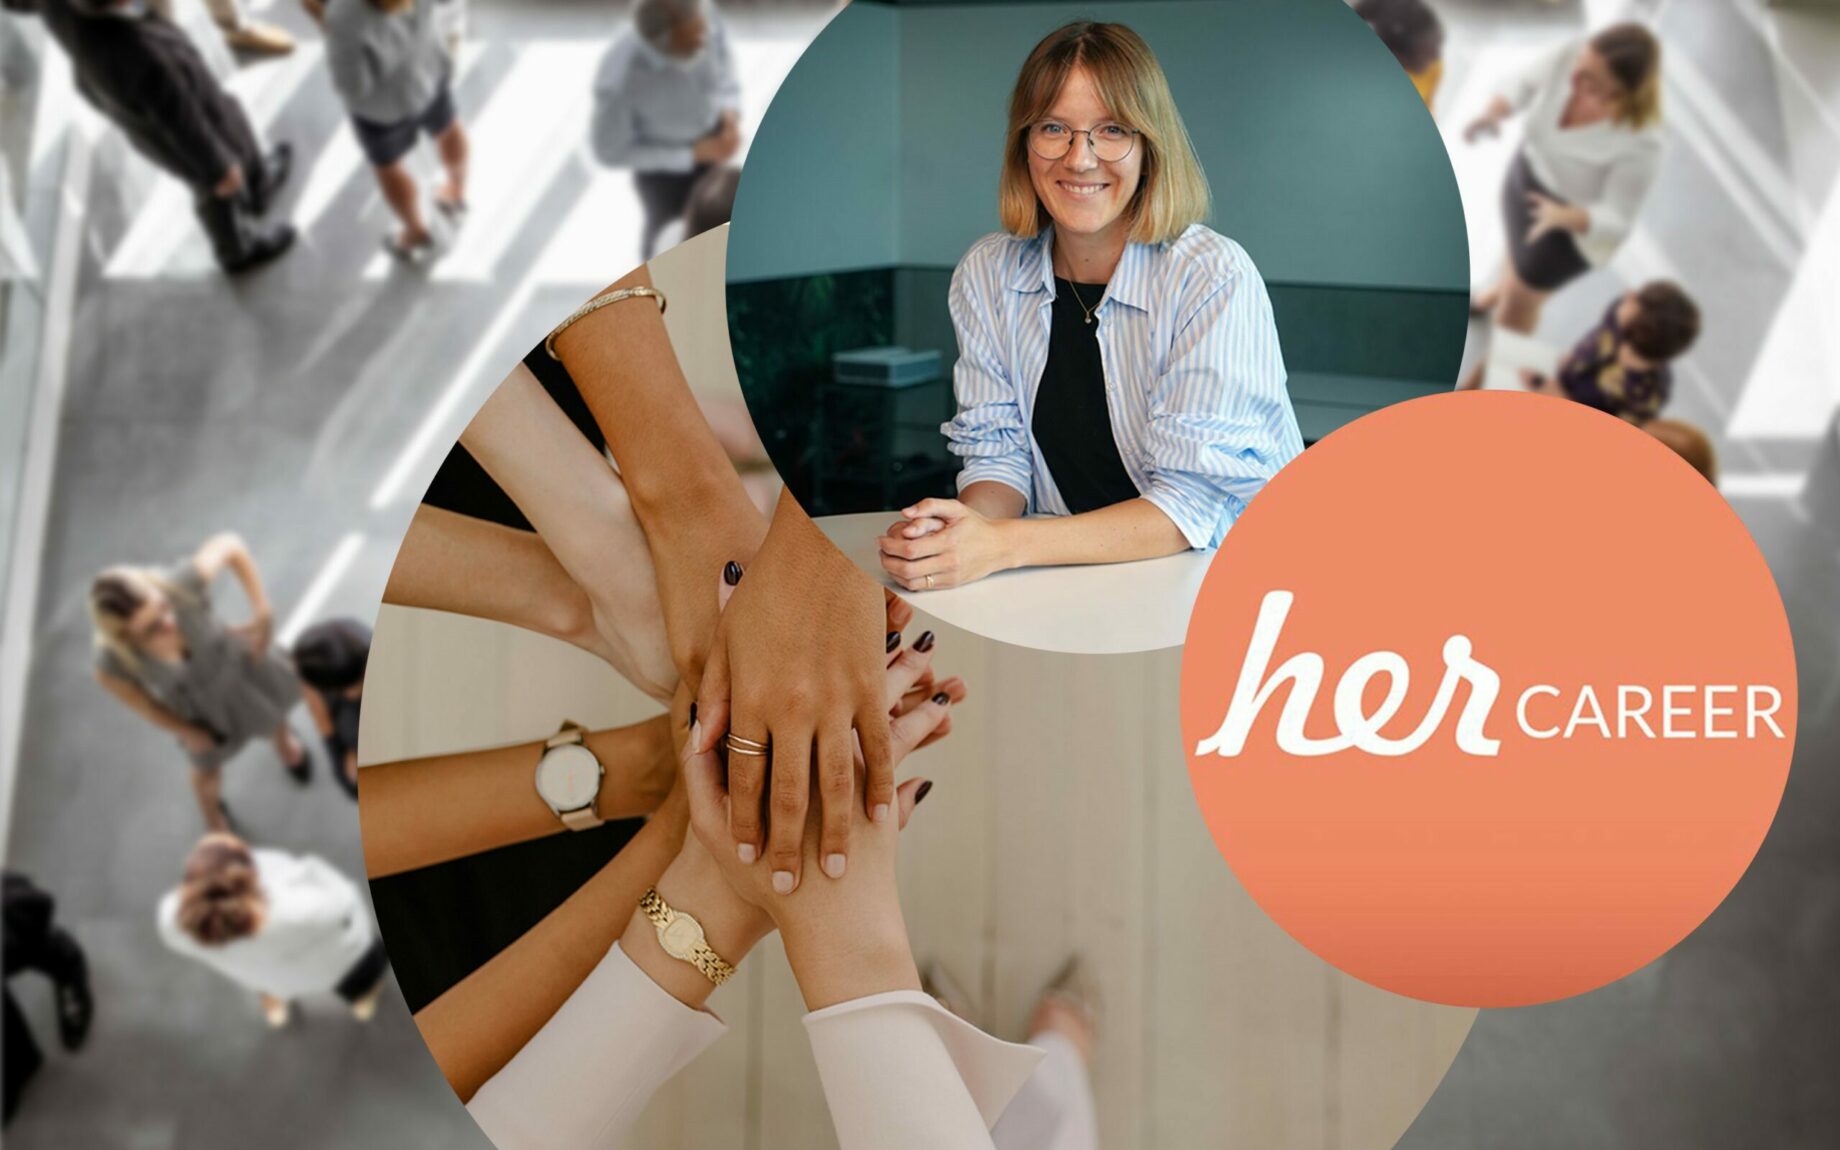 Three circles with a portrait of Sandra Ruckmich, the HerCareer logo and hands symbolizing teamwork